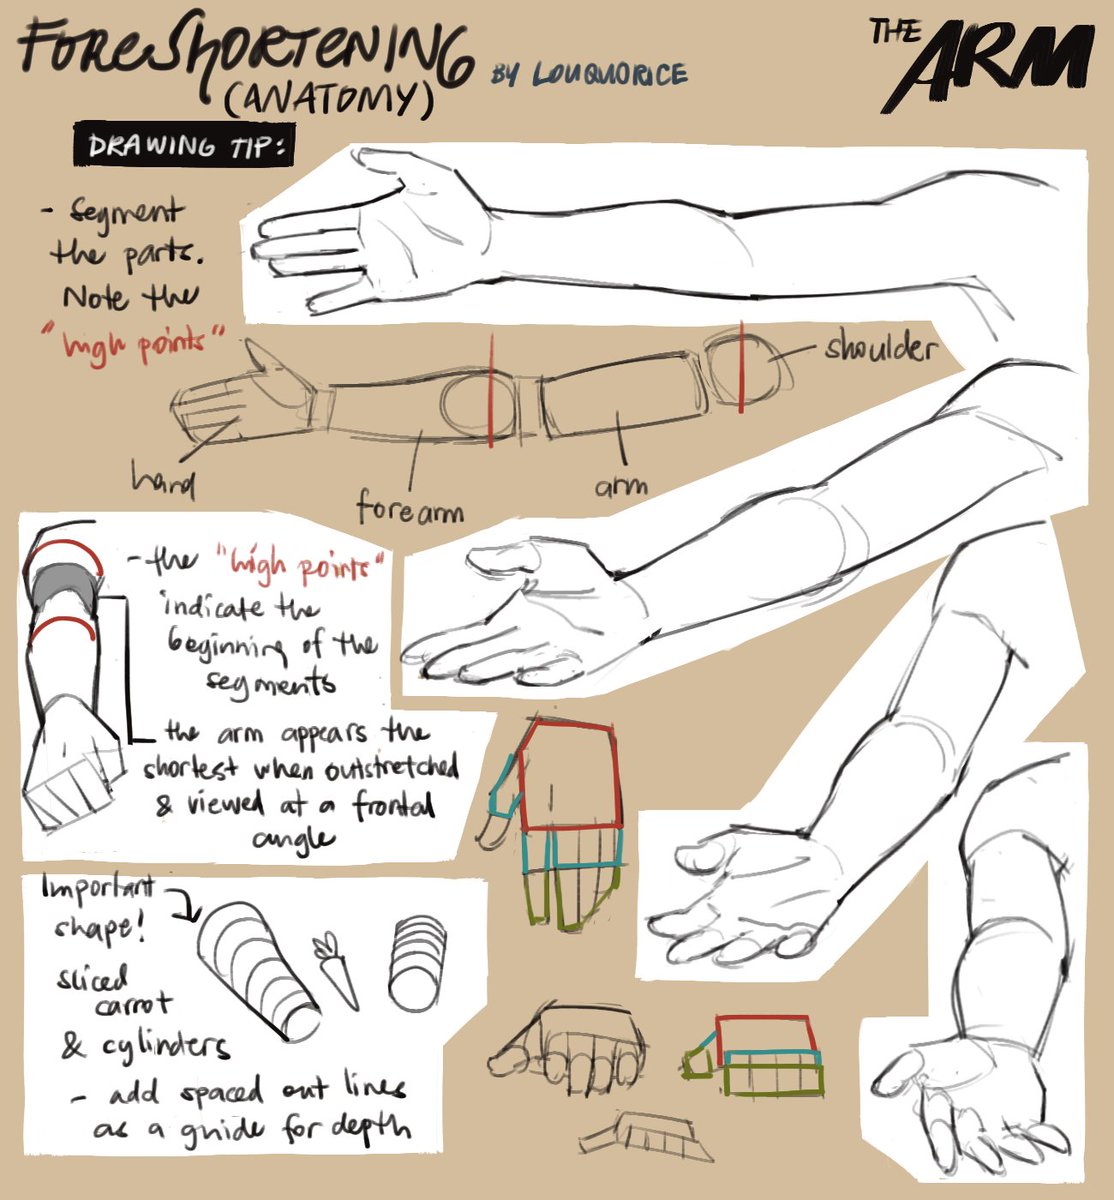 speaking of drawing hands... here's a bunch of tutorials i made on the topic 😉 